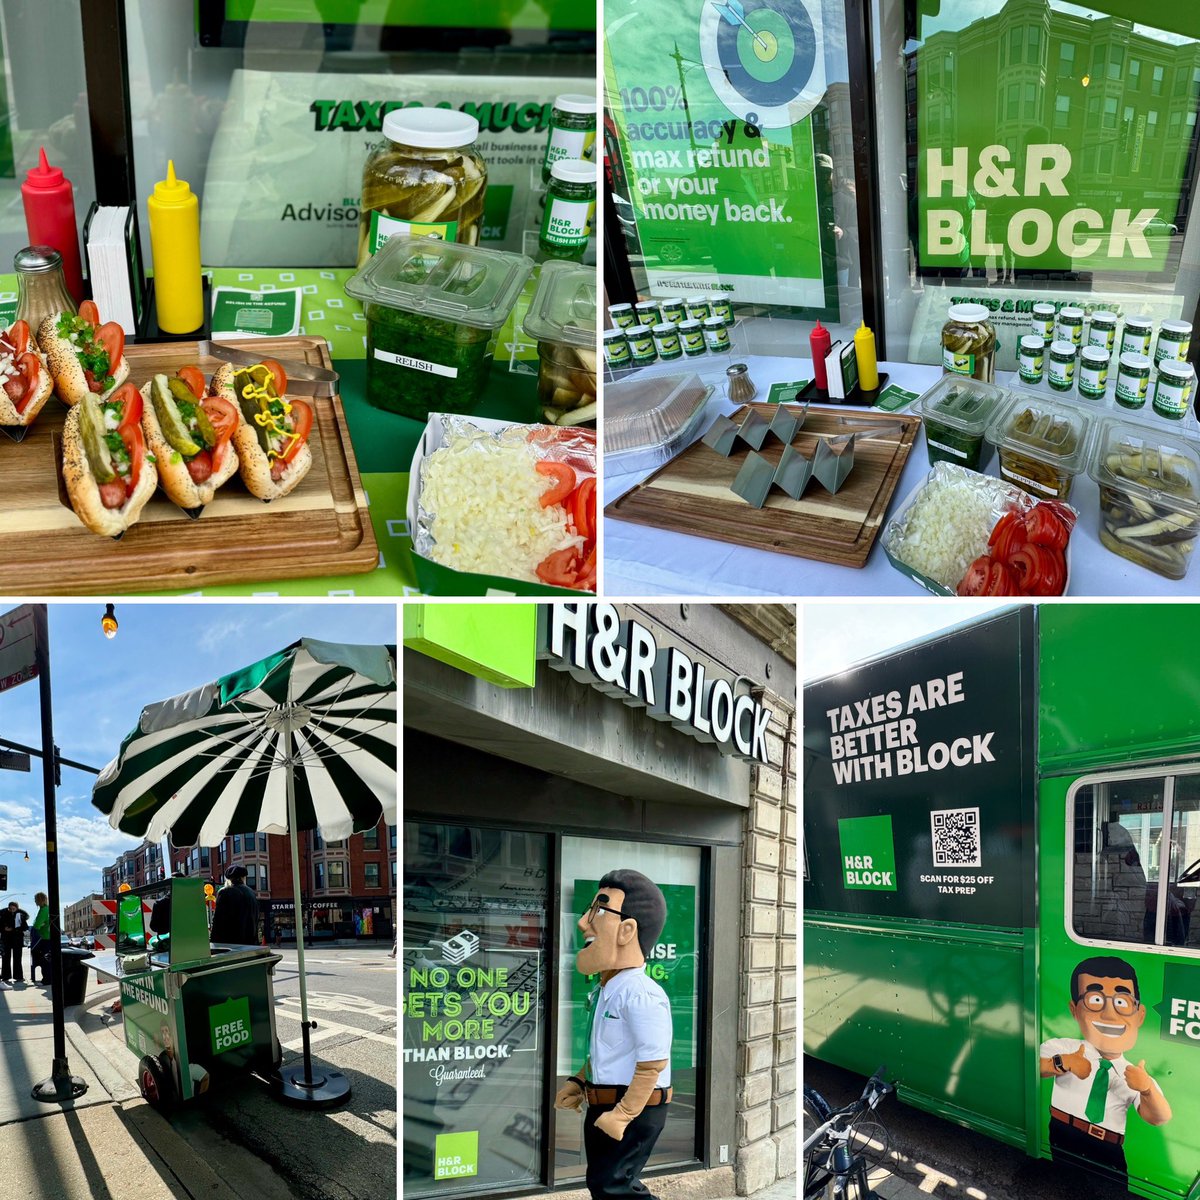 Anyone hungry? 😋 We’re grilling up FREE Chicago dogs 🌭 🌭 until 2 pm over on the corner of Belmont and Clark! Come stop by, grab some free food, giveaways and some discount tax prep tickets from @HRBlock on us! hrblock.com/chicago